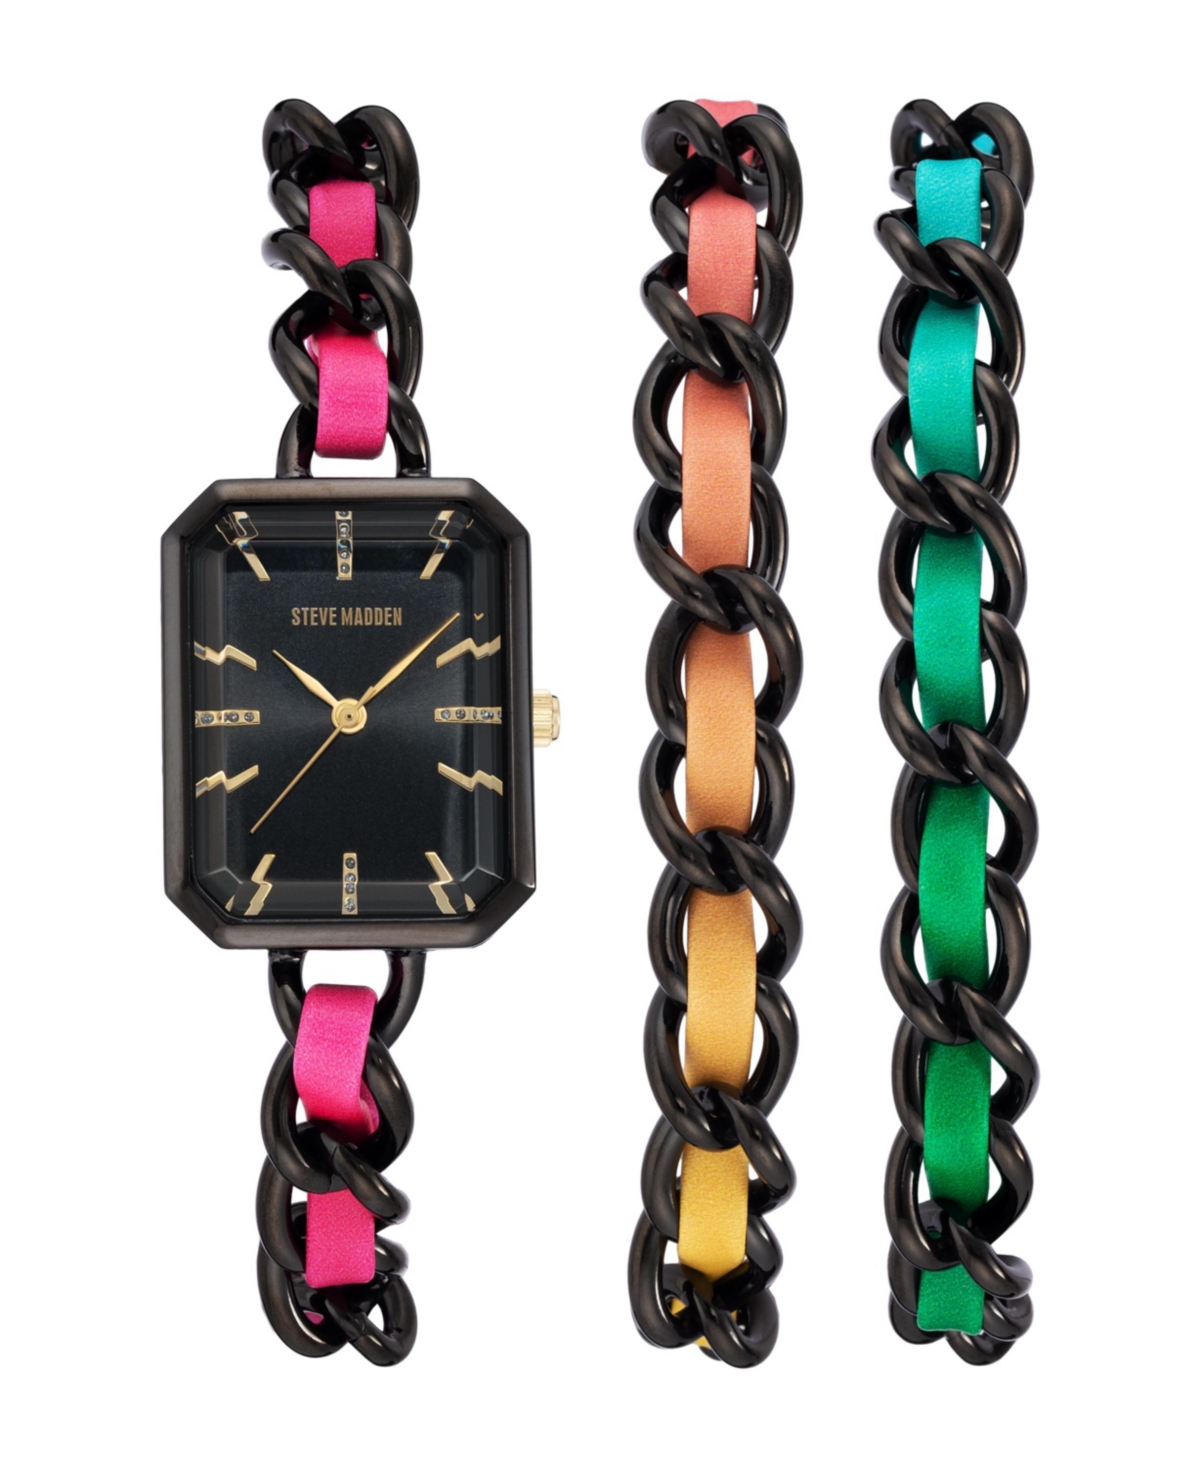 Women's Rainbow Polyurethane Leather Strap with Attached Black-Tone Chain Watch Set, 22X28mm - Black, Multi